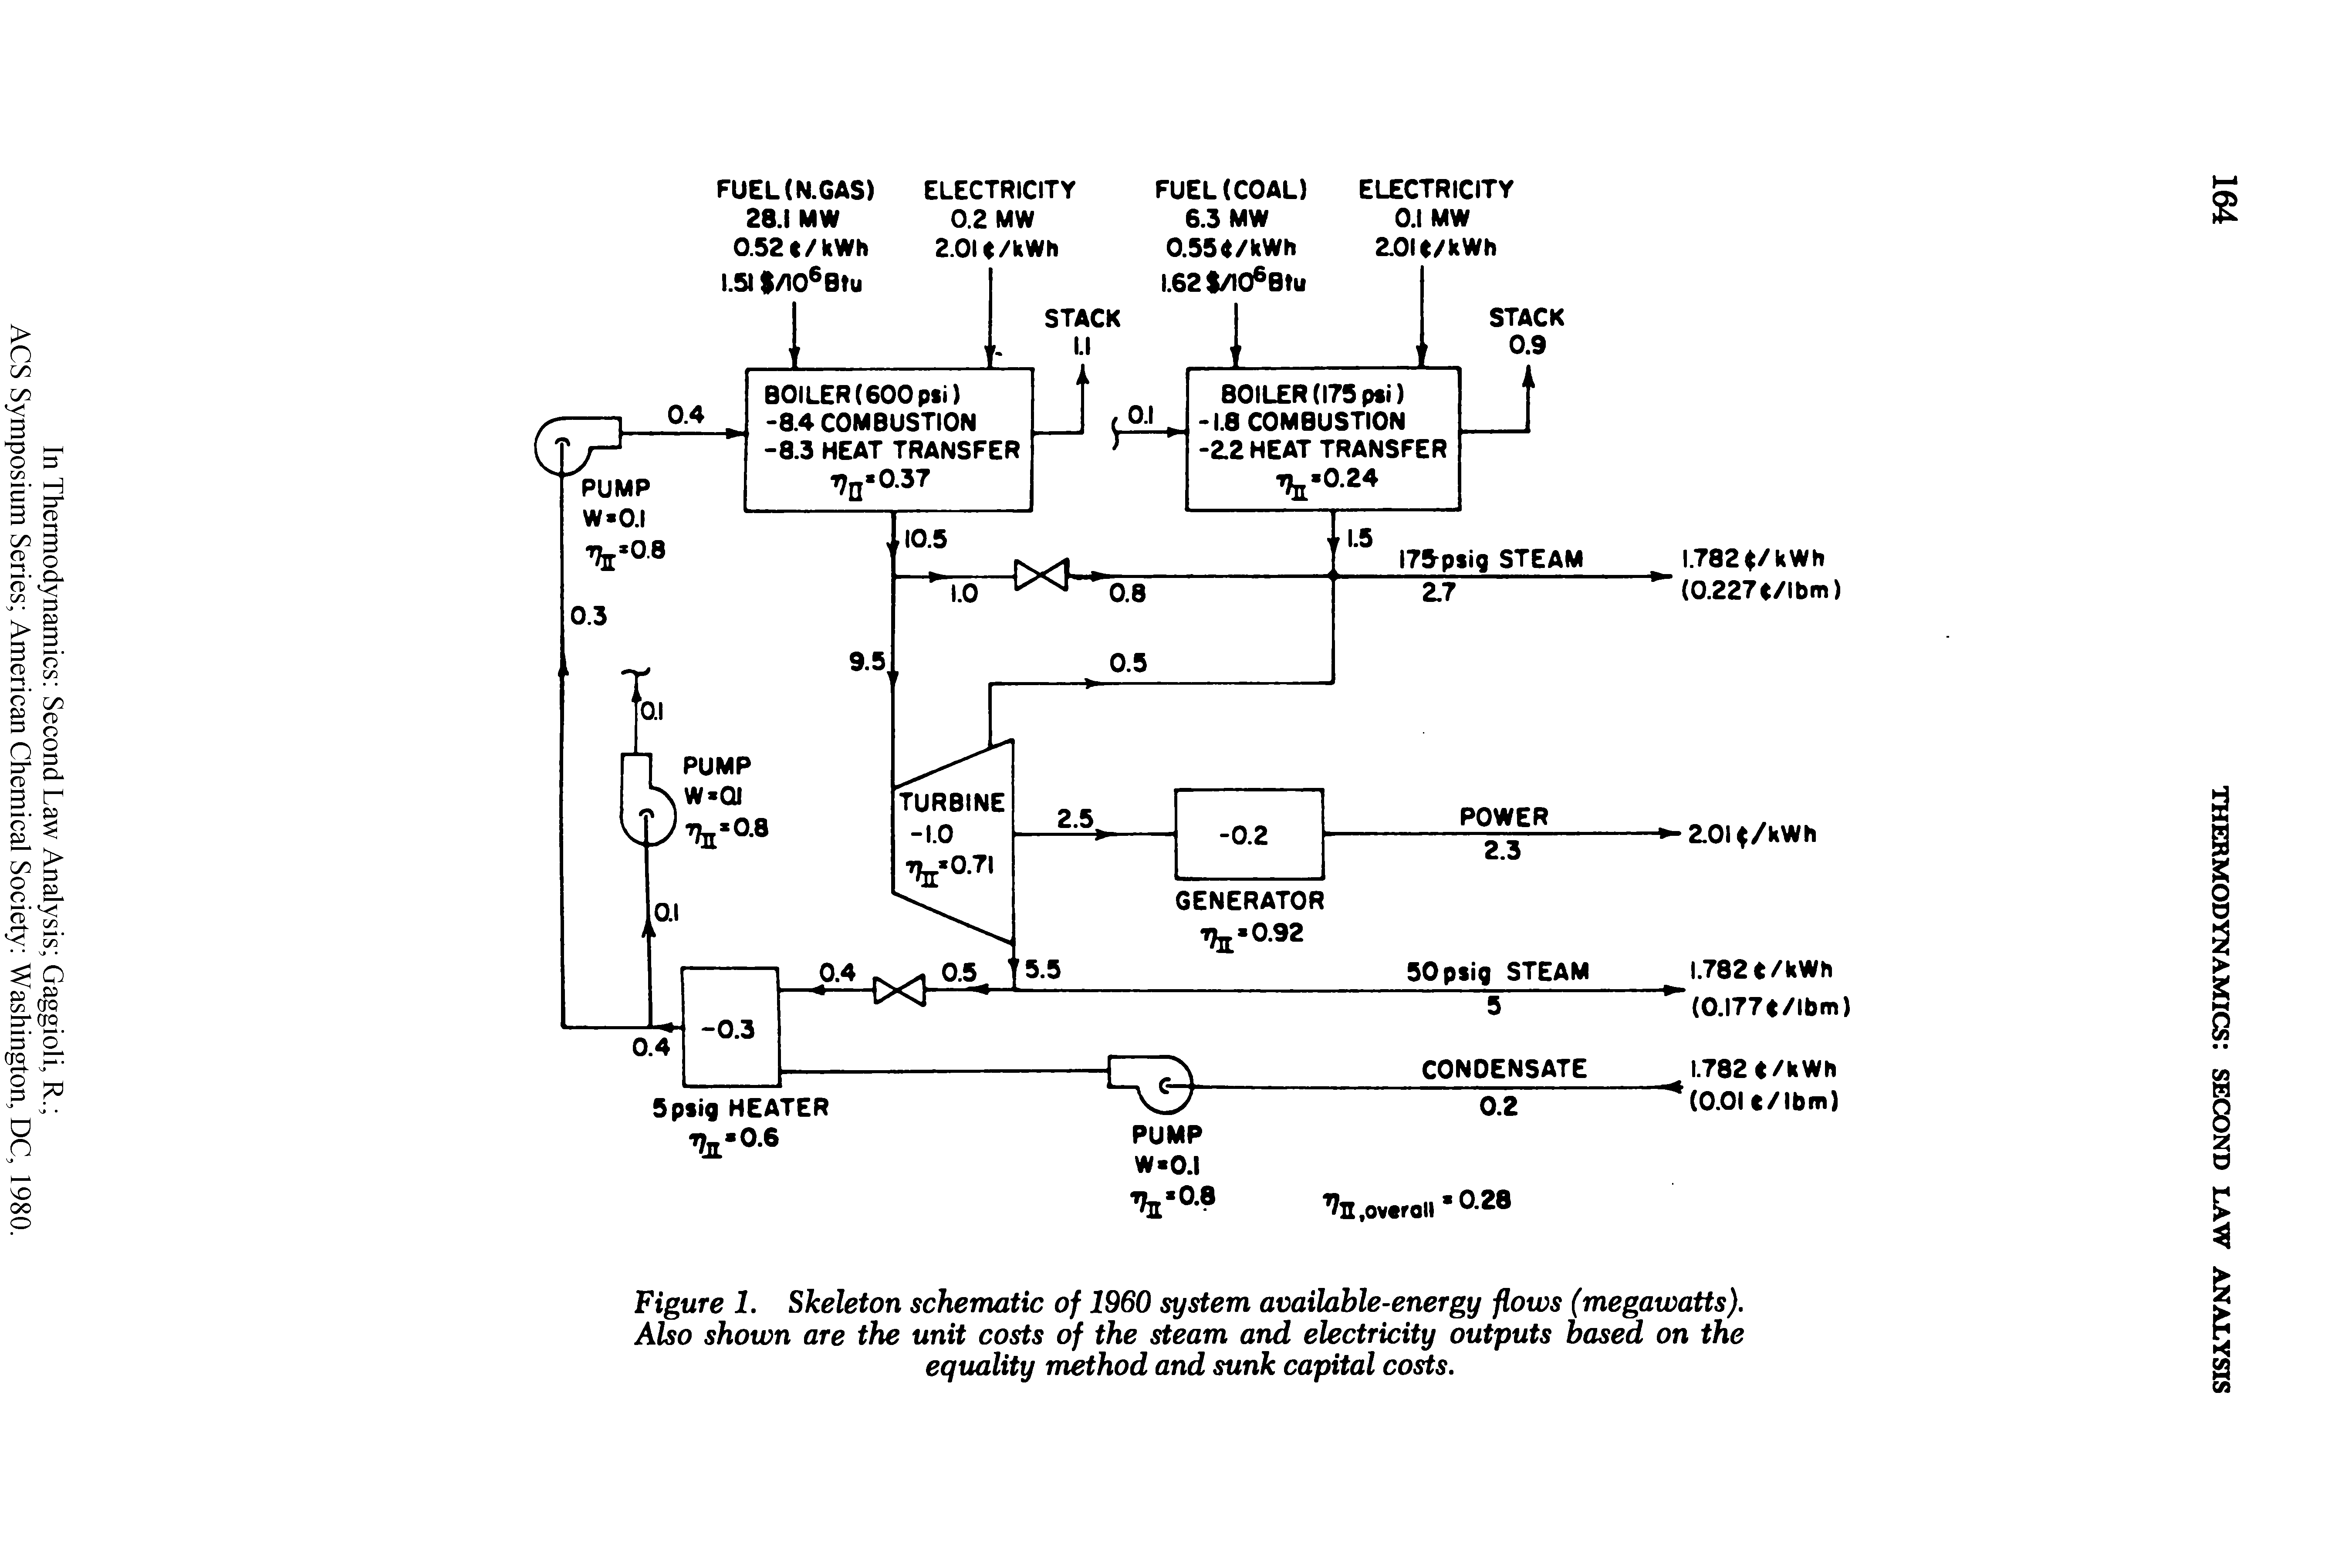 Figure 1. Skeleton schematic of 1960 system available-energy flows (megawatts). Also shown are the unit costs of the steam and electricity outputs based on the equality method and sunk capital costs.